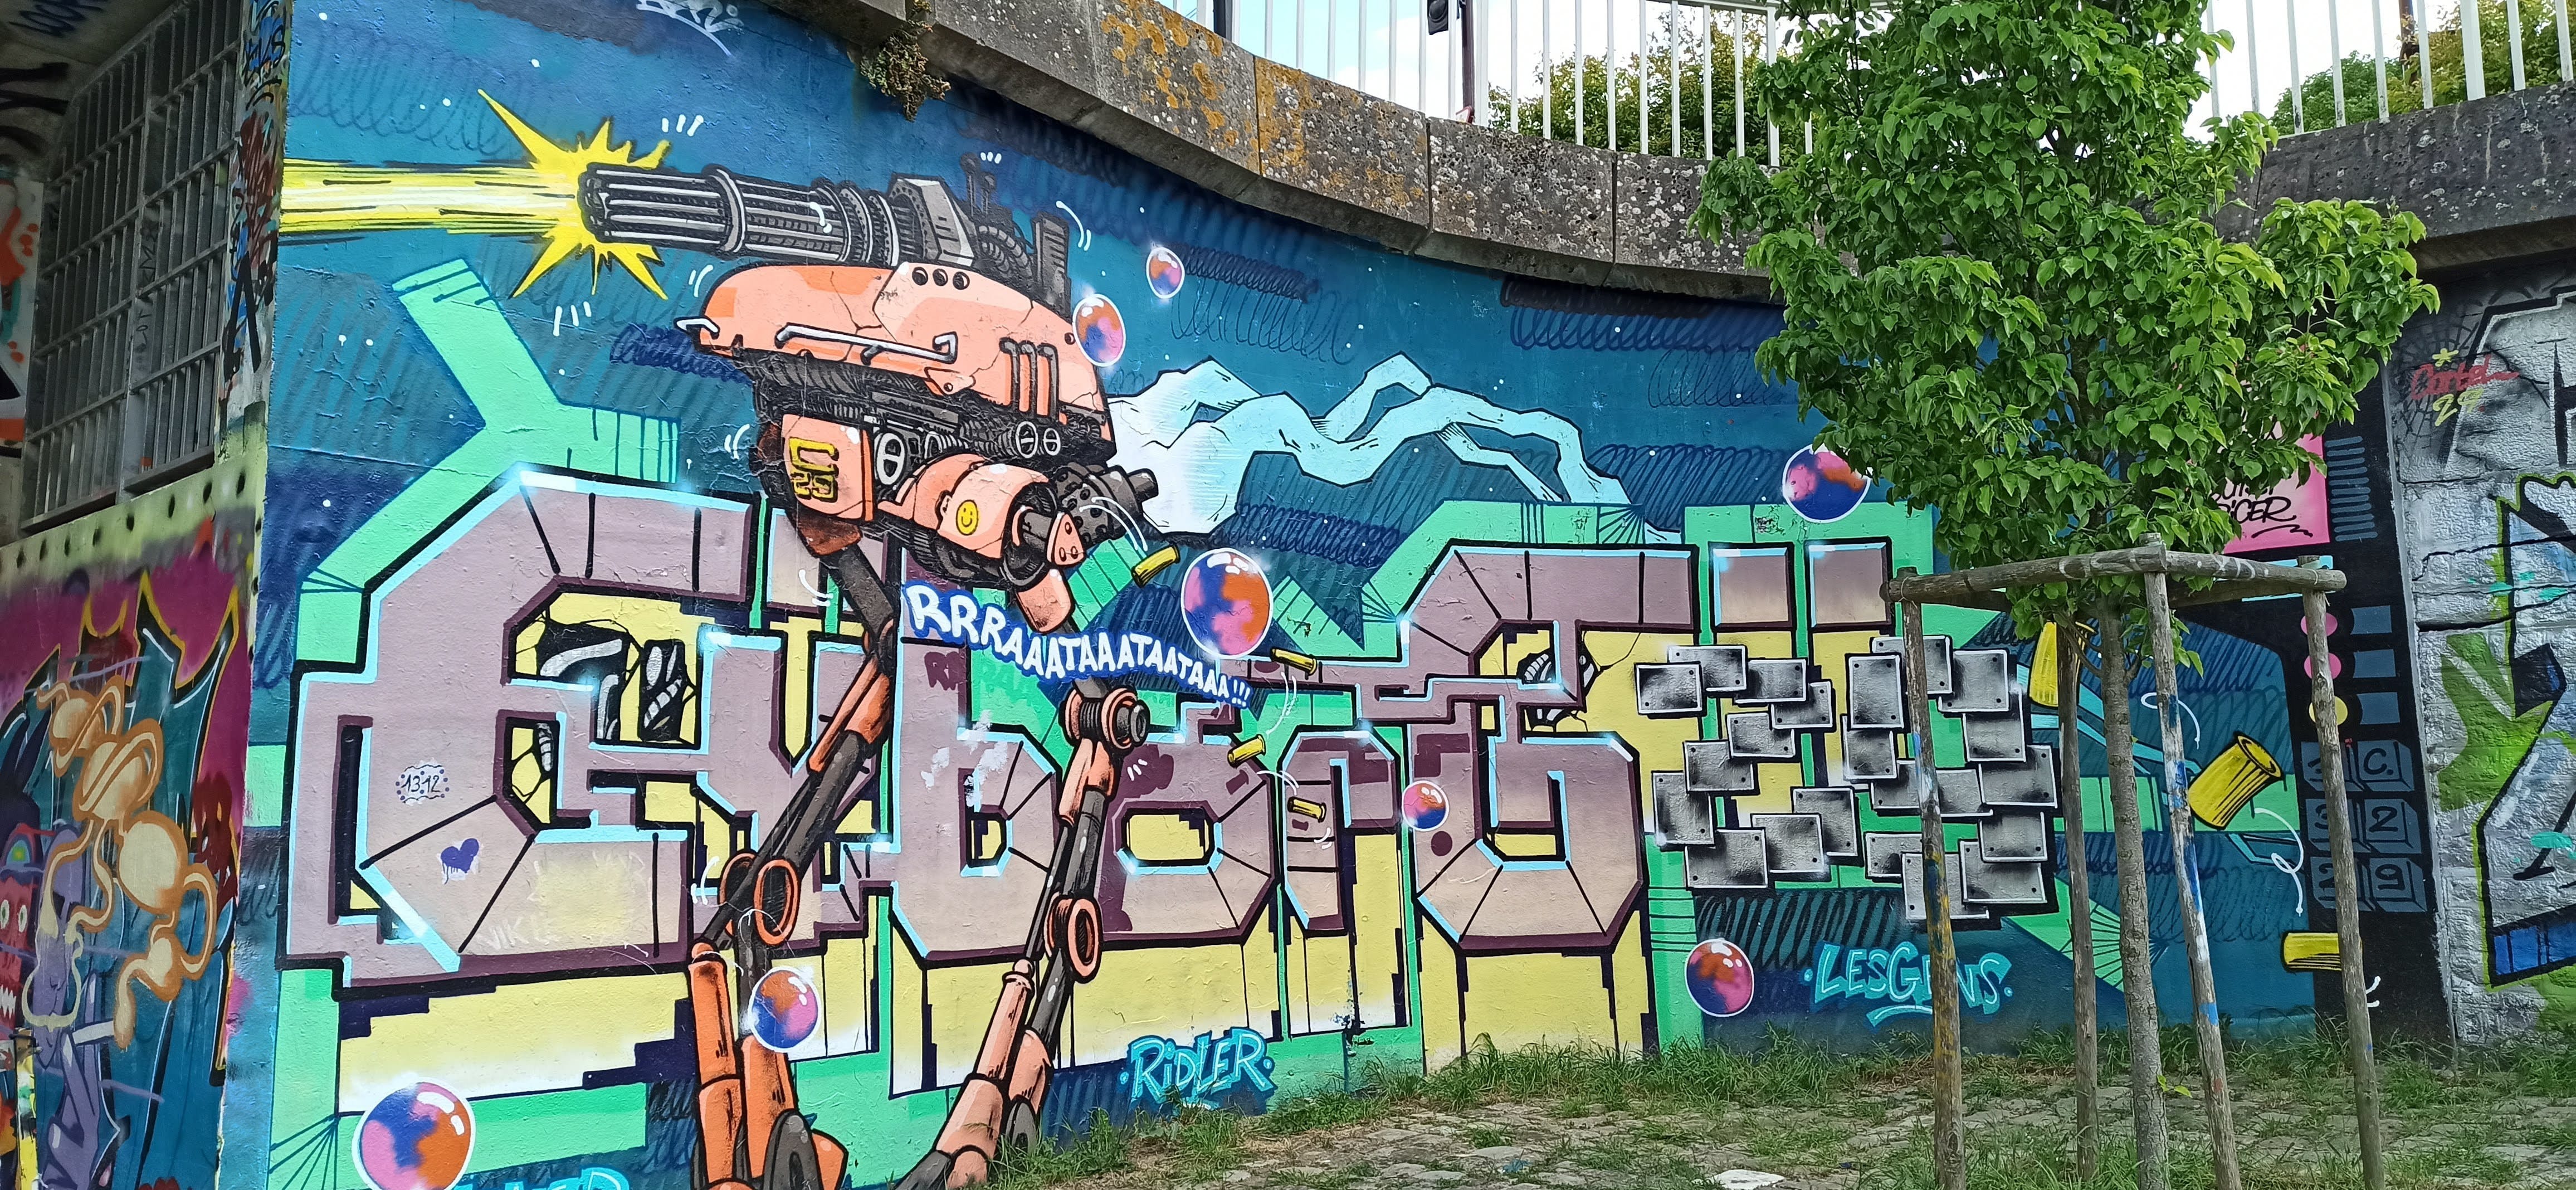 Graffiti 5052  captured by Rabot in Nantes France